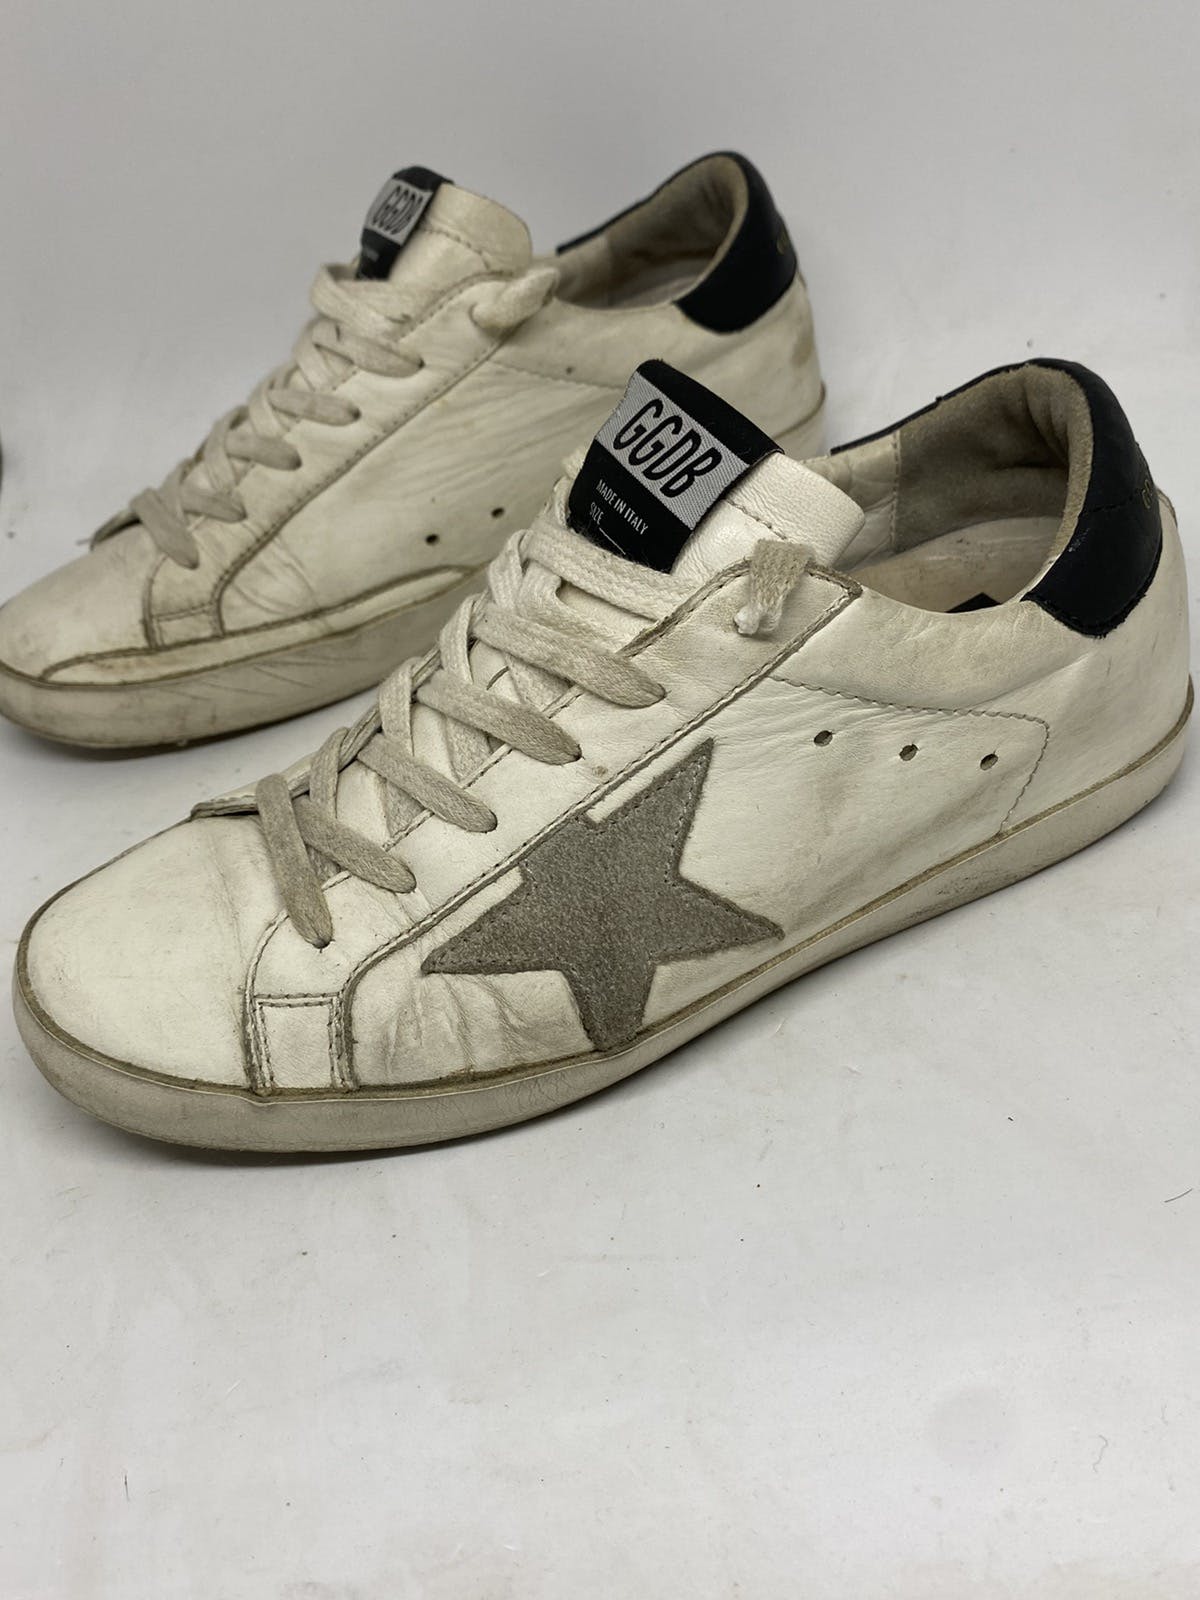 ggdb superstar white black leather size36 women or us6 - 1